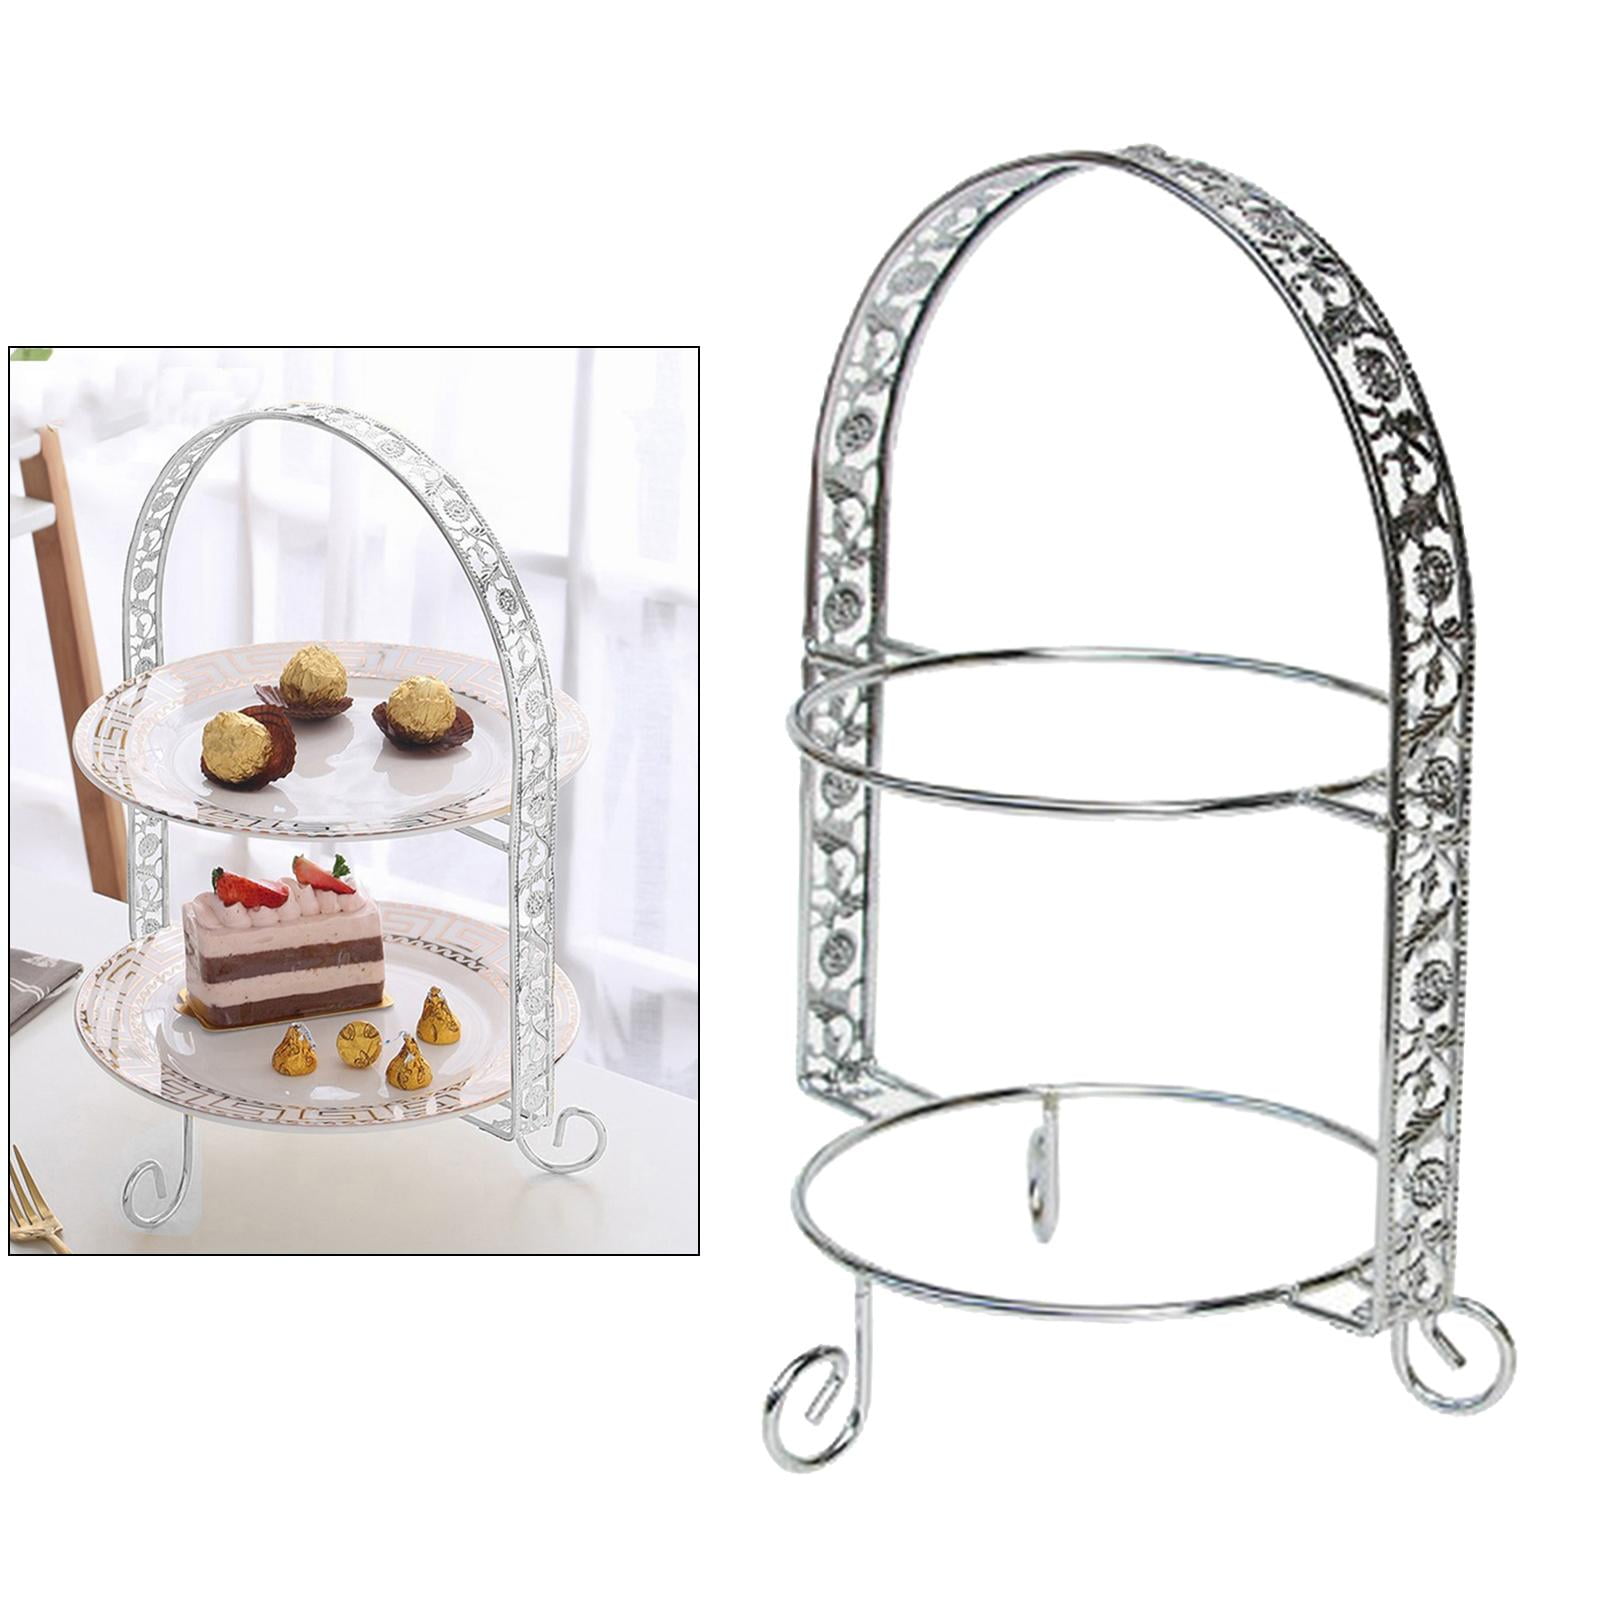 2 Tier Serving Stand Rack, Serving Platters Stand, Serving Trays for ...